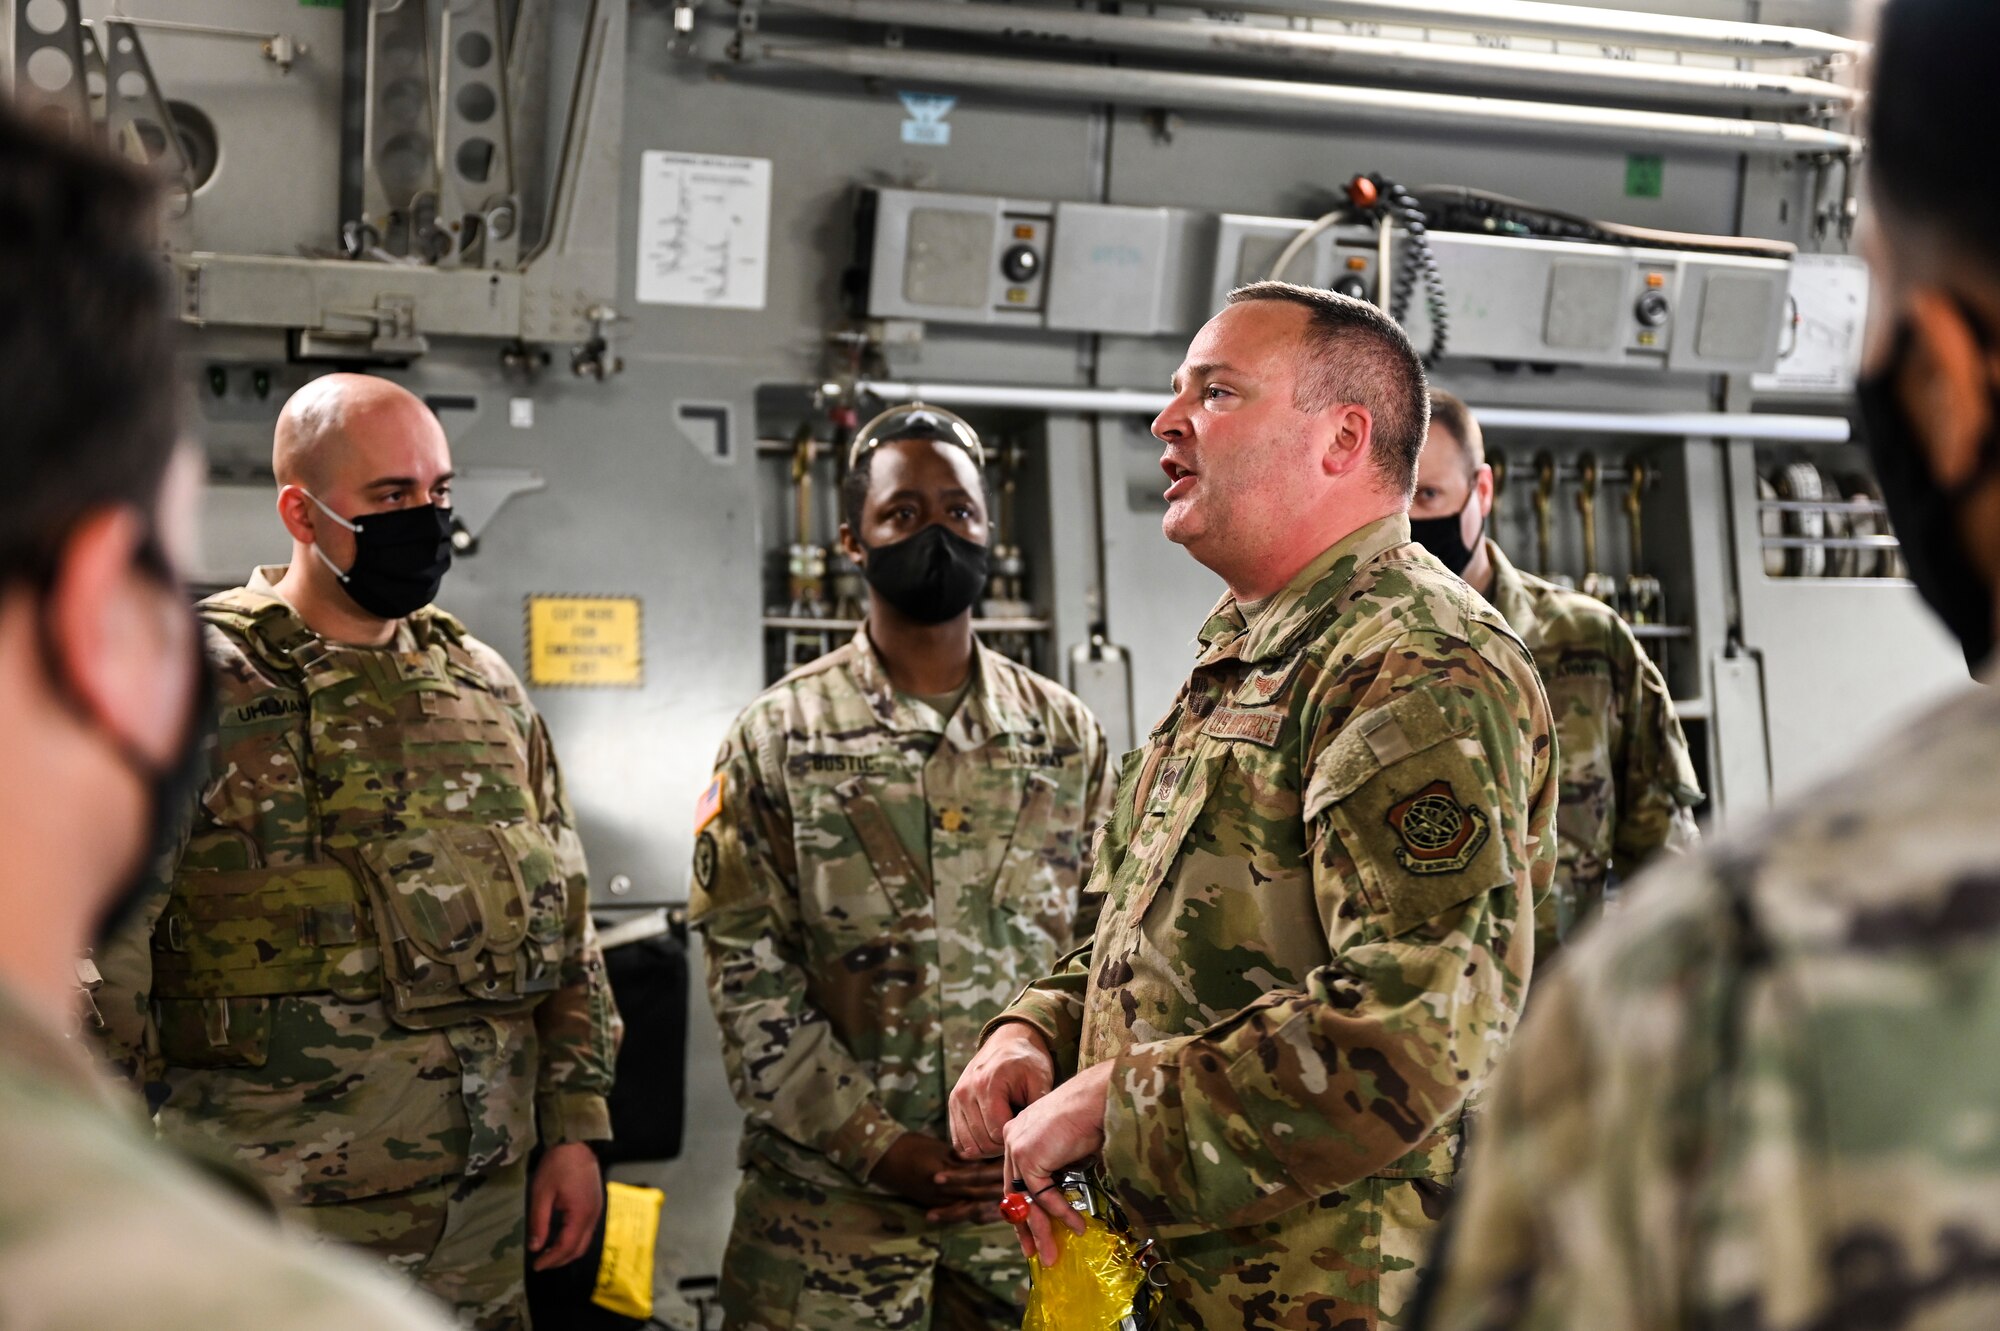 U.S. Air Force Master Sgt. Cole Rehse, 8th Airlift Squadron loadmaster, provides a flight safety briefing to U.S. Army Soldiers aboard a C-17 Globemaster III as part of Exercise Rainier War at Joint Base Lewis-McChord, Washington, April 28, 2021. Rainier War tests the 62nd Airlift Wing's capability to plan, generate and execute a deployment tasking, sustain contingency operations, demonstrate full spectrum readiness while executing agile combat employment in a contested, degraded and operationally limited environment. (U.S. Air Force photo by Master Sgt. Julius Delos Reyes)